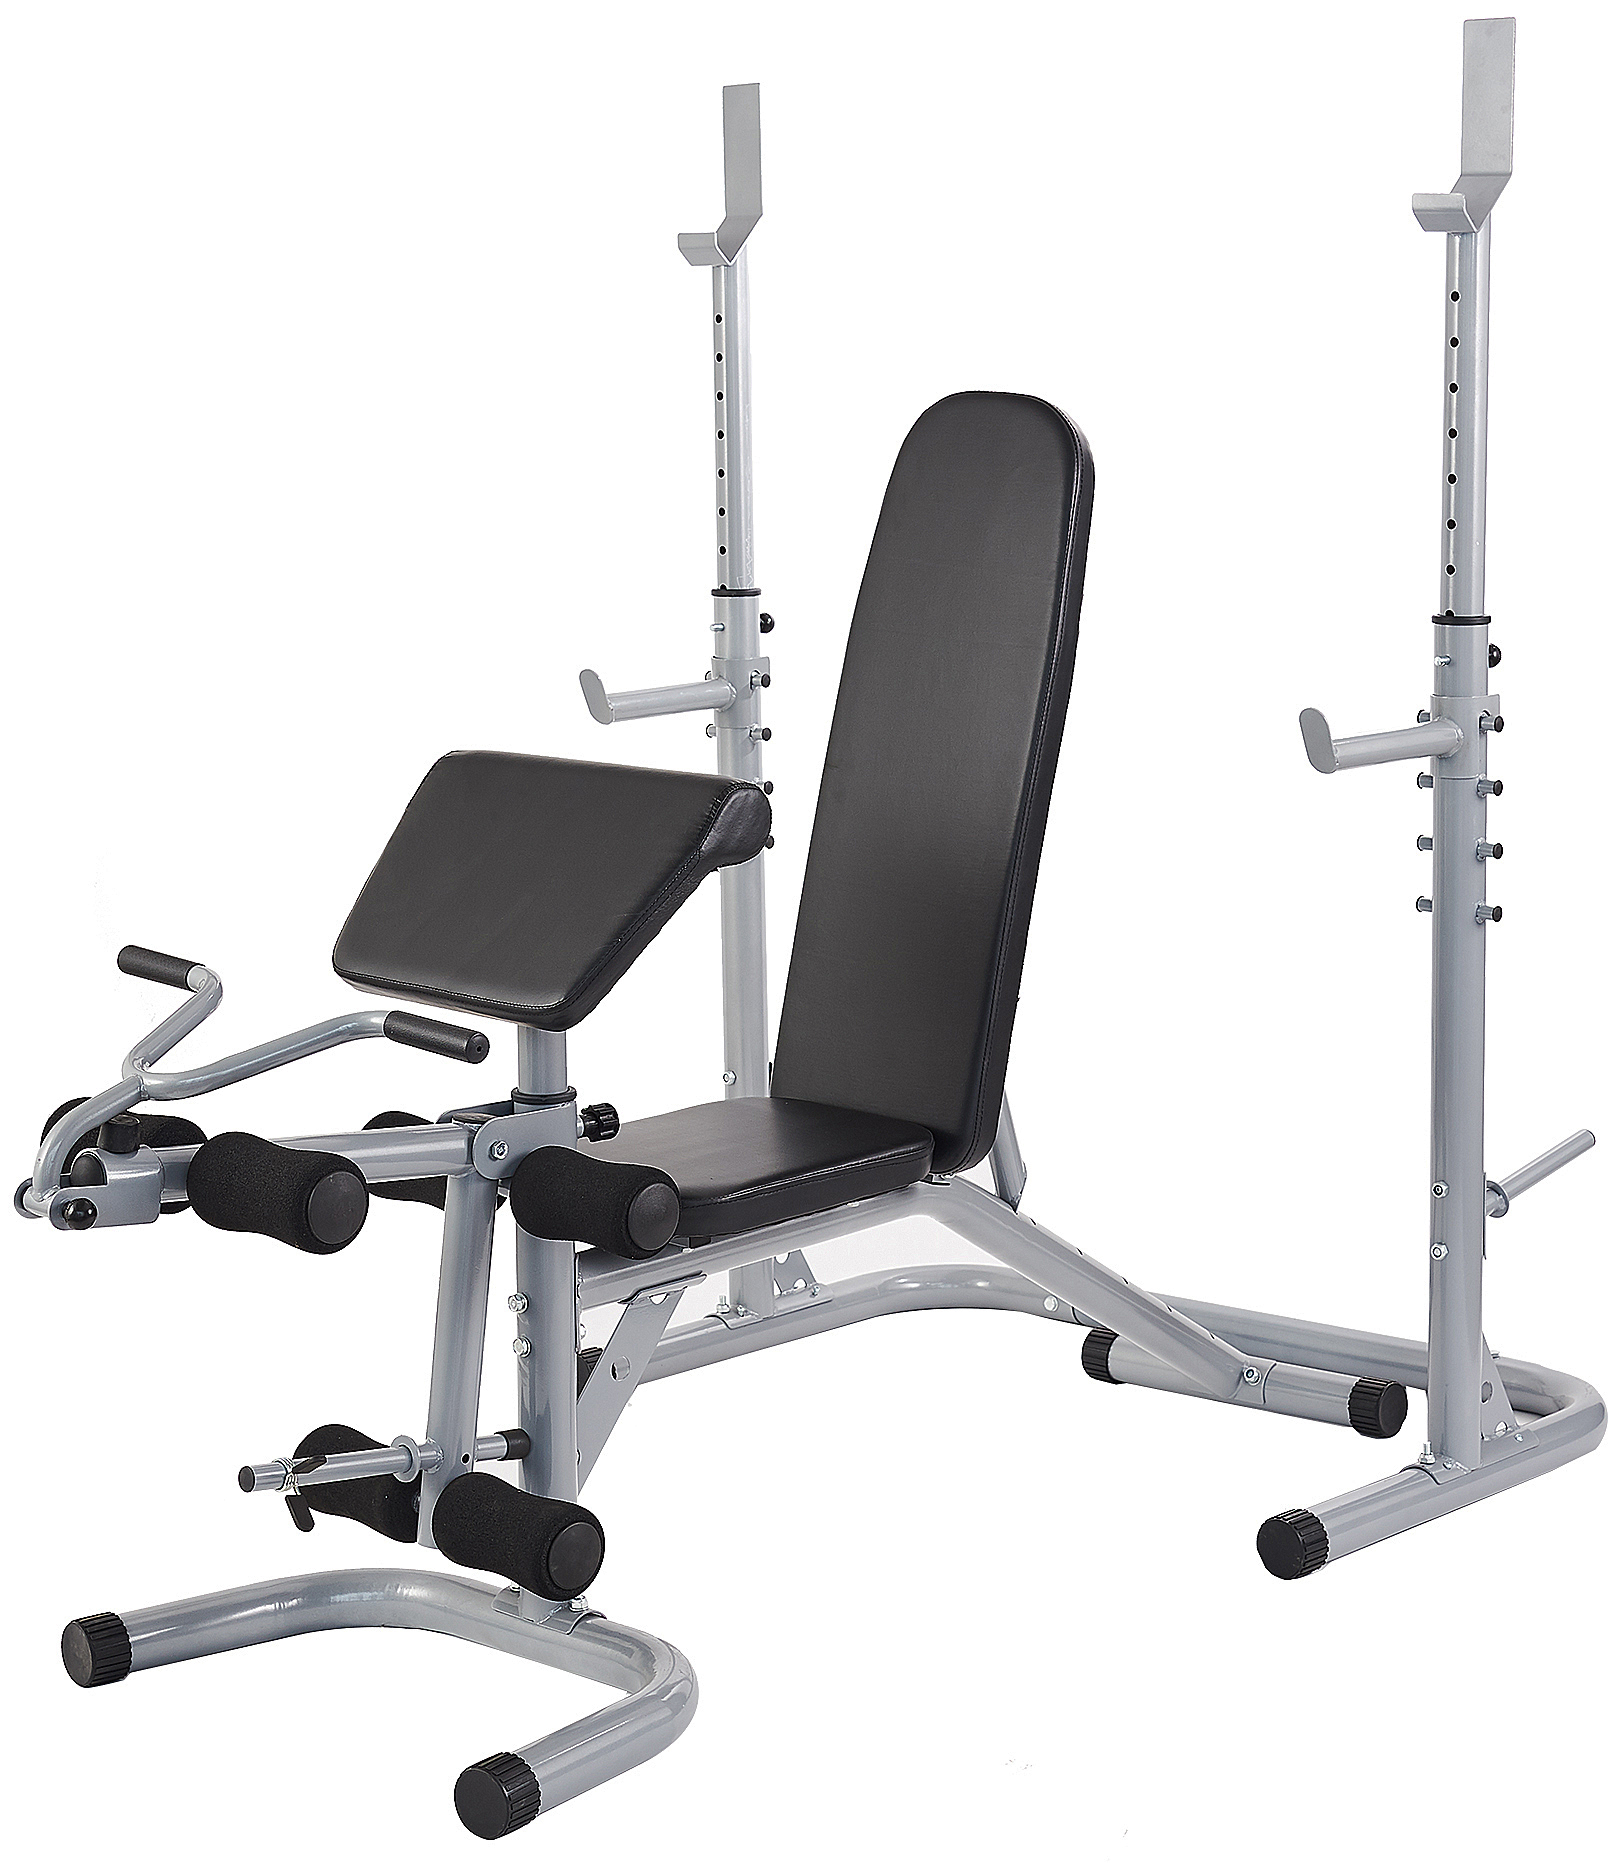 Everyday Essentials Multifunctional Workout Station Adjustable Olympic Workout Bench with Squat Rack, Leg Extension, Preacher Curl, and Weight Storage - image 2 of 6